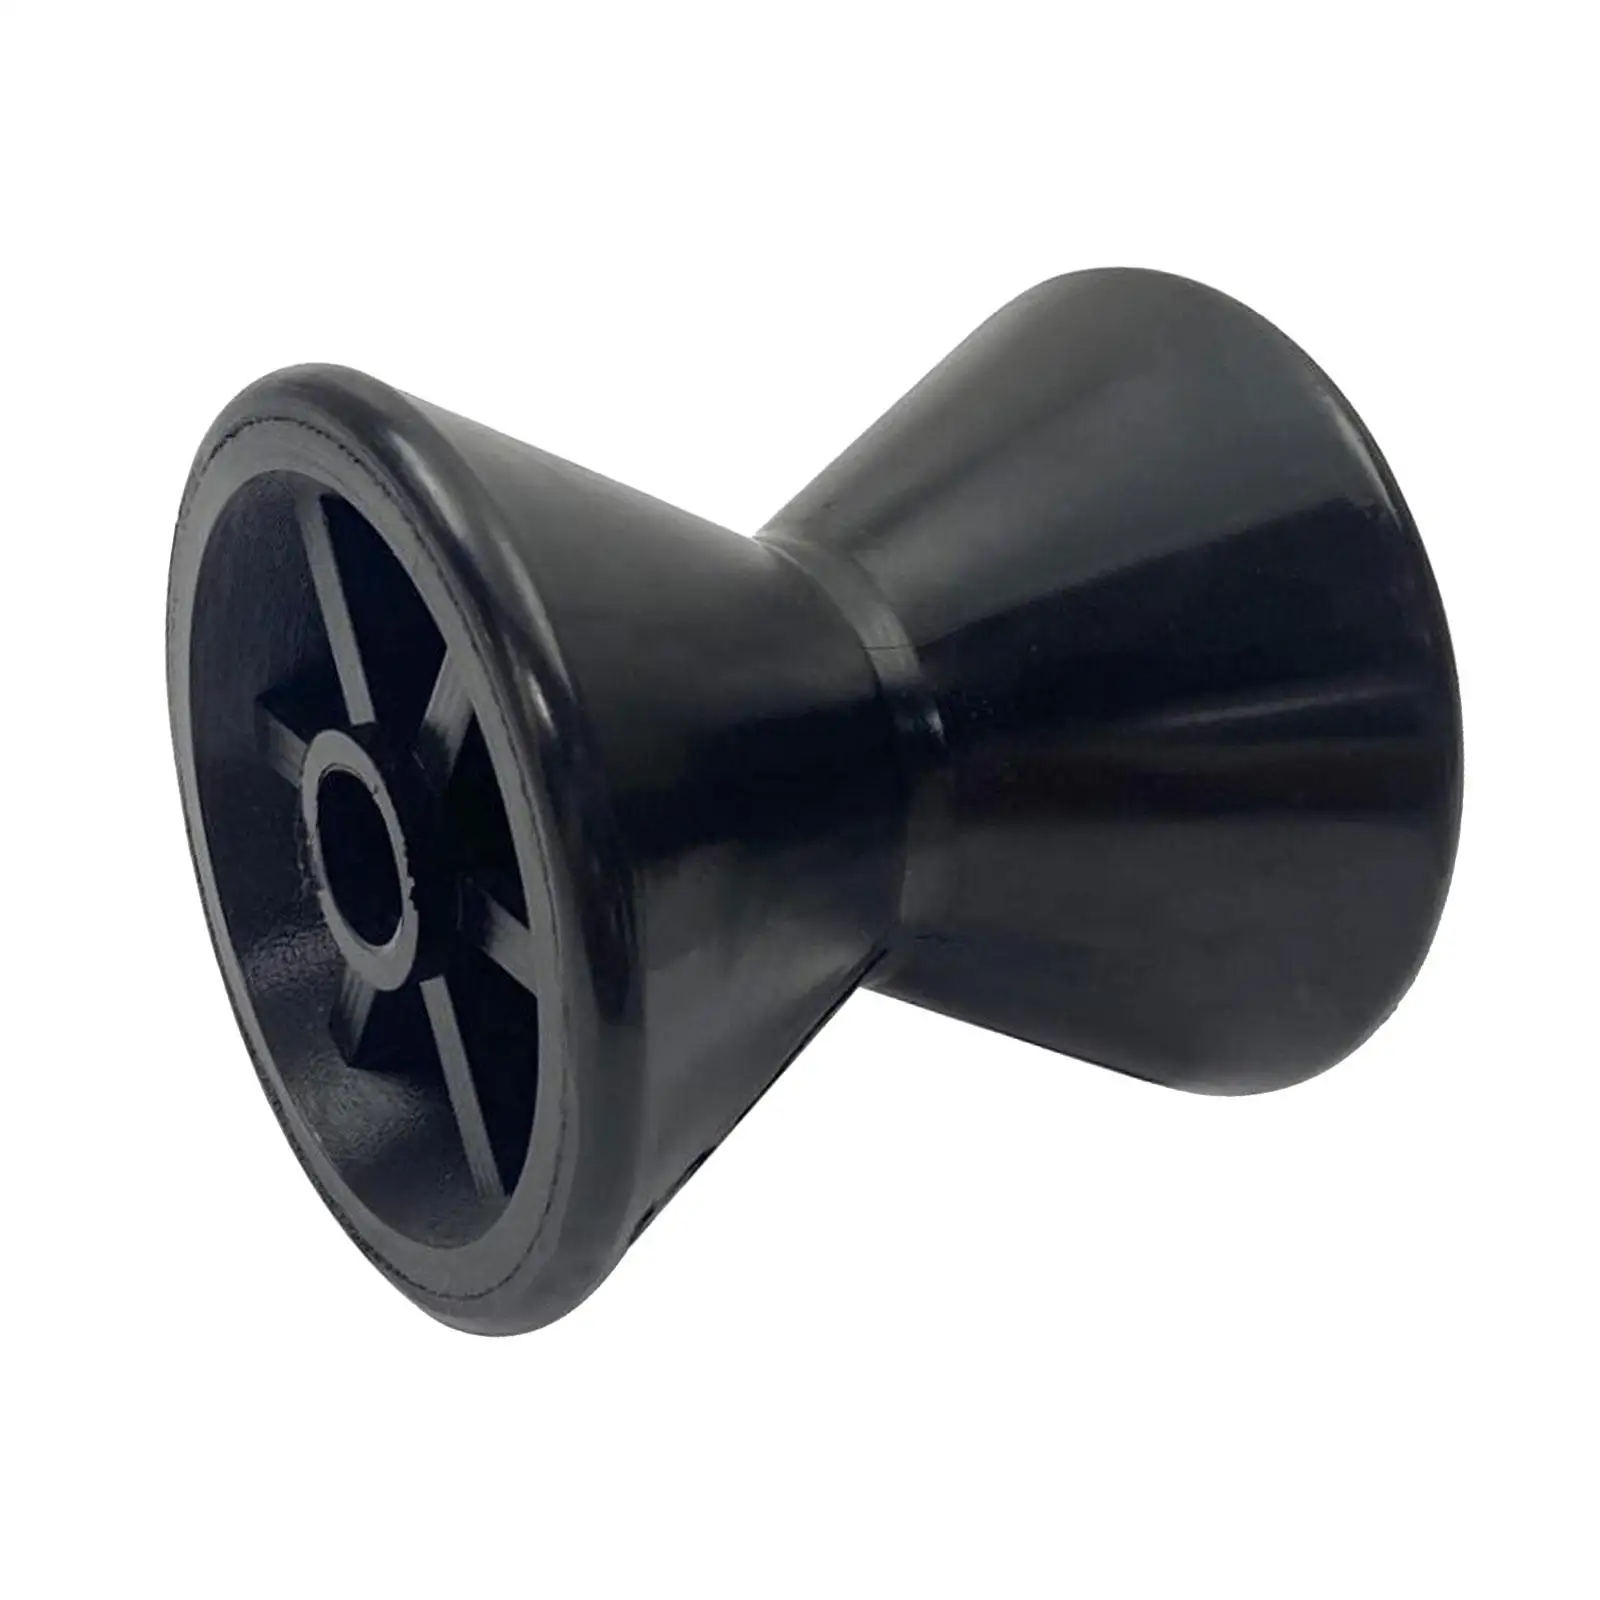 Bow Roller 3.5 inch Durable Supplies High Performance Black Replace Parts Accessory Ego Trailer Parts Rubber Bow Roller